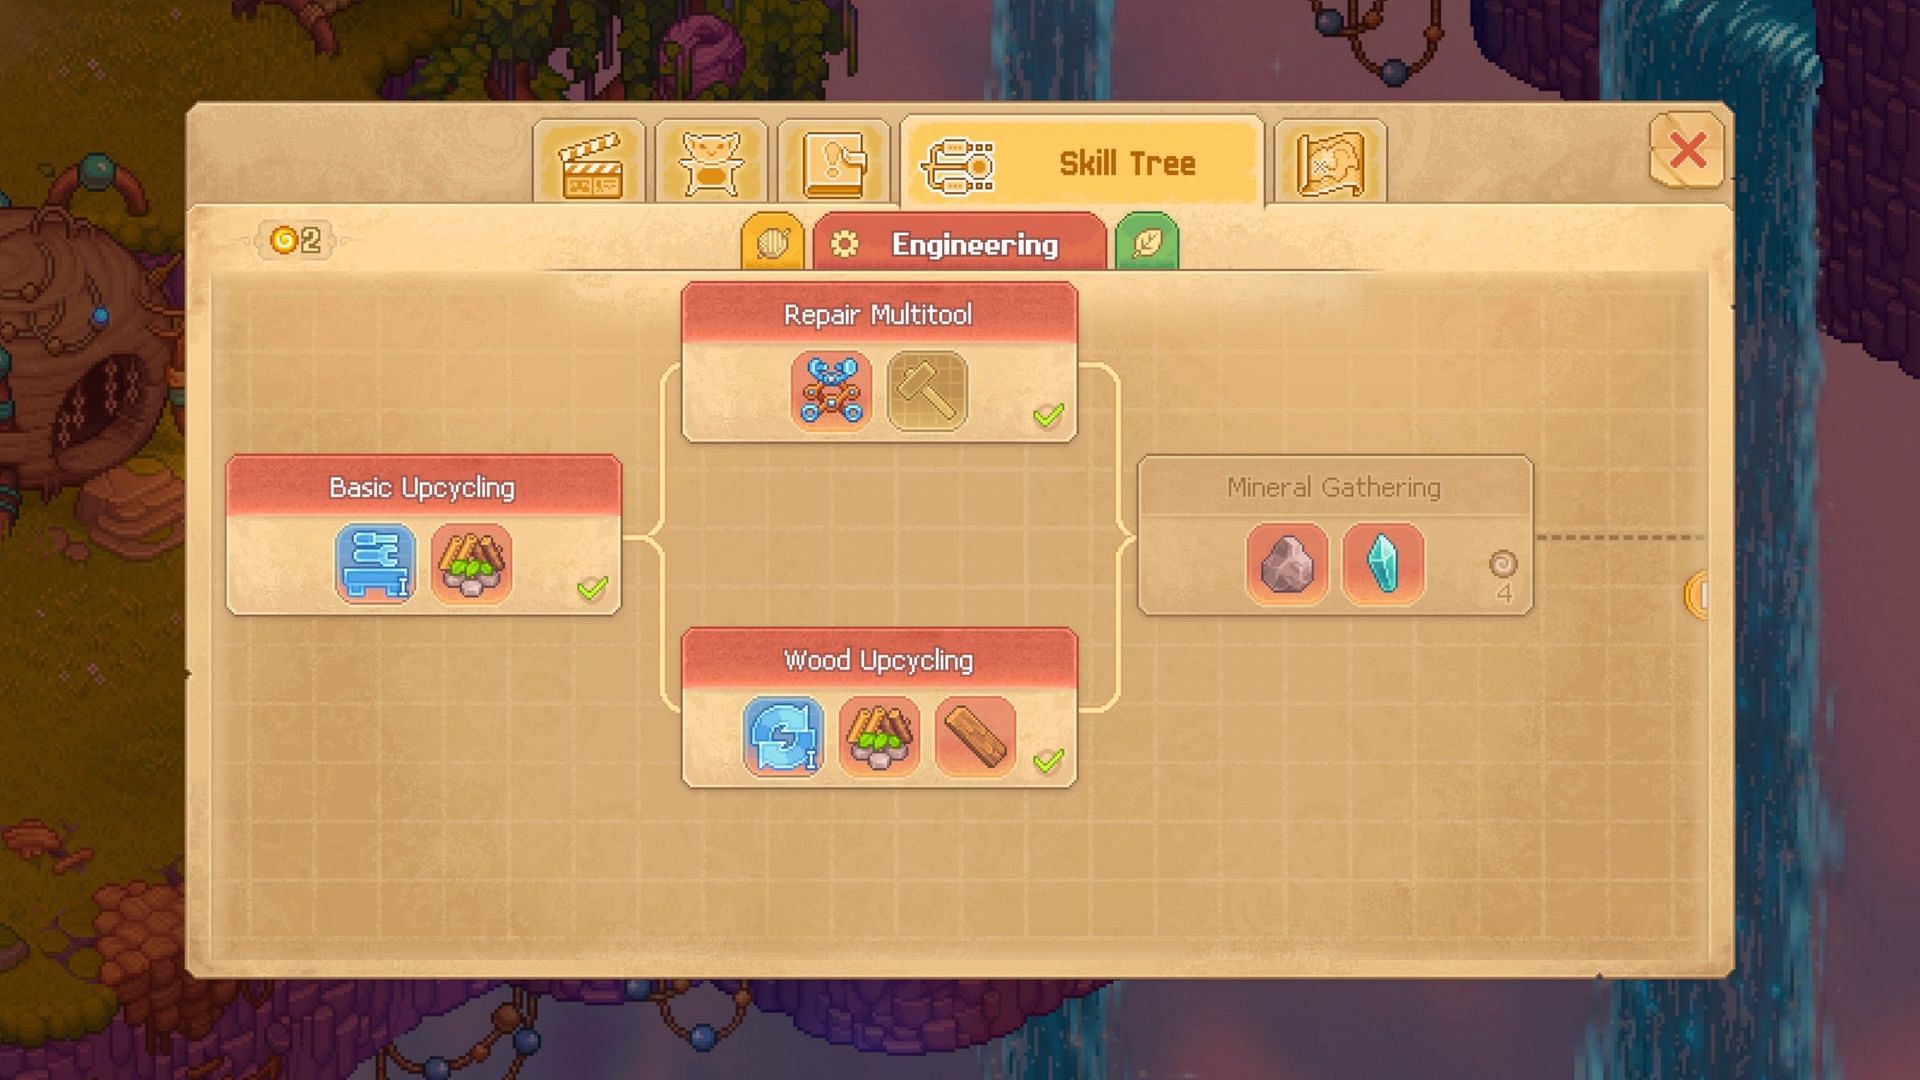 Each category has varied skills, spanning extensive skill trees (Image via Lazy Bear Games)